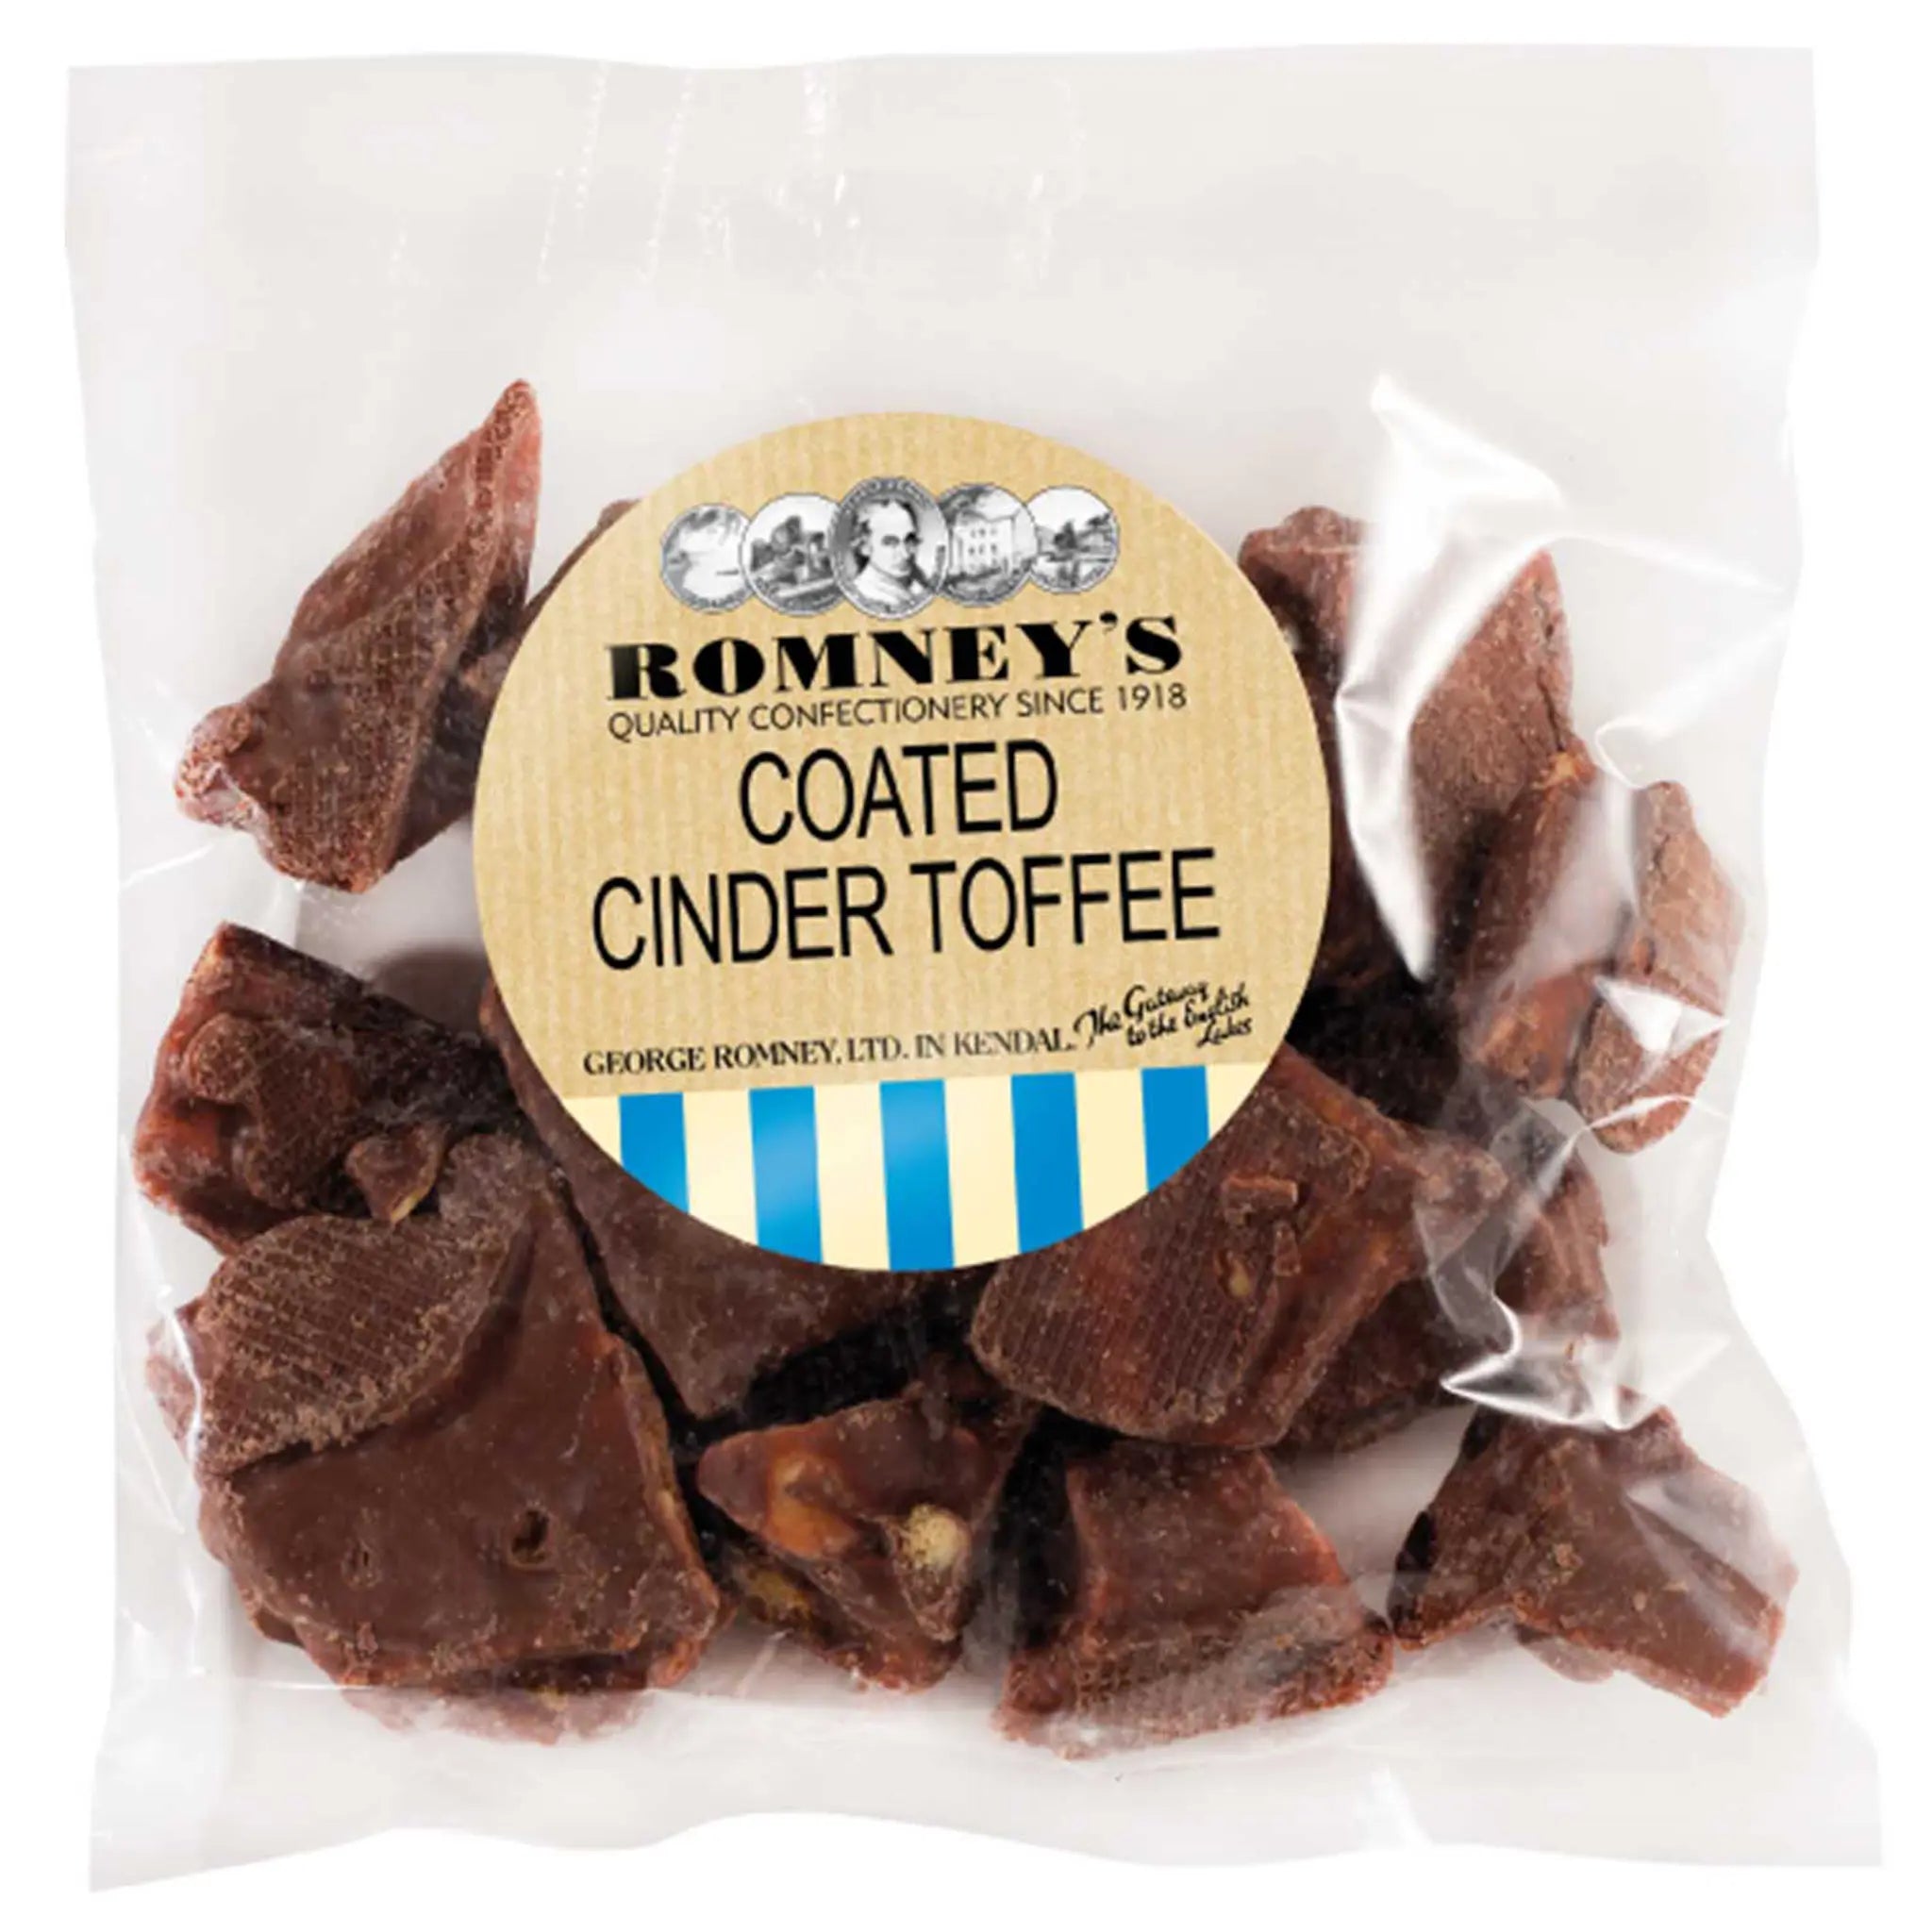 A product image showing a transparent bag filled with pieces of Chocolate Coated Cinder Toffee. The bag has a label stuck to the side that features the Romney's logo and the words 'Coated Cinder Toffee'.